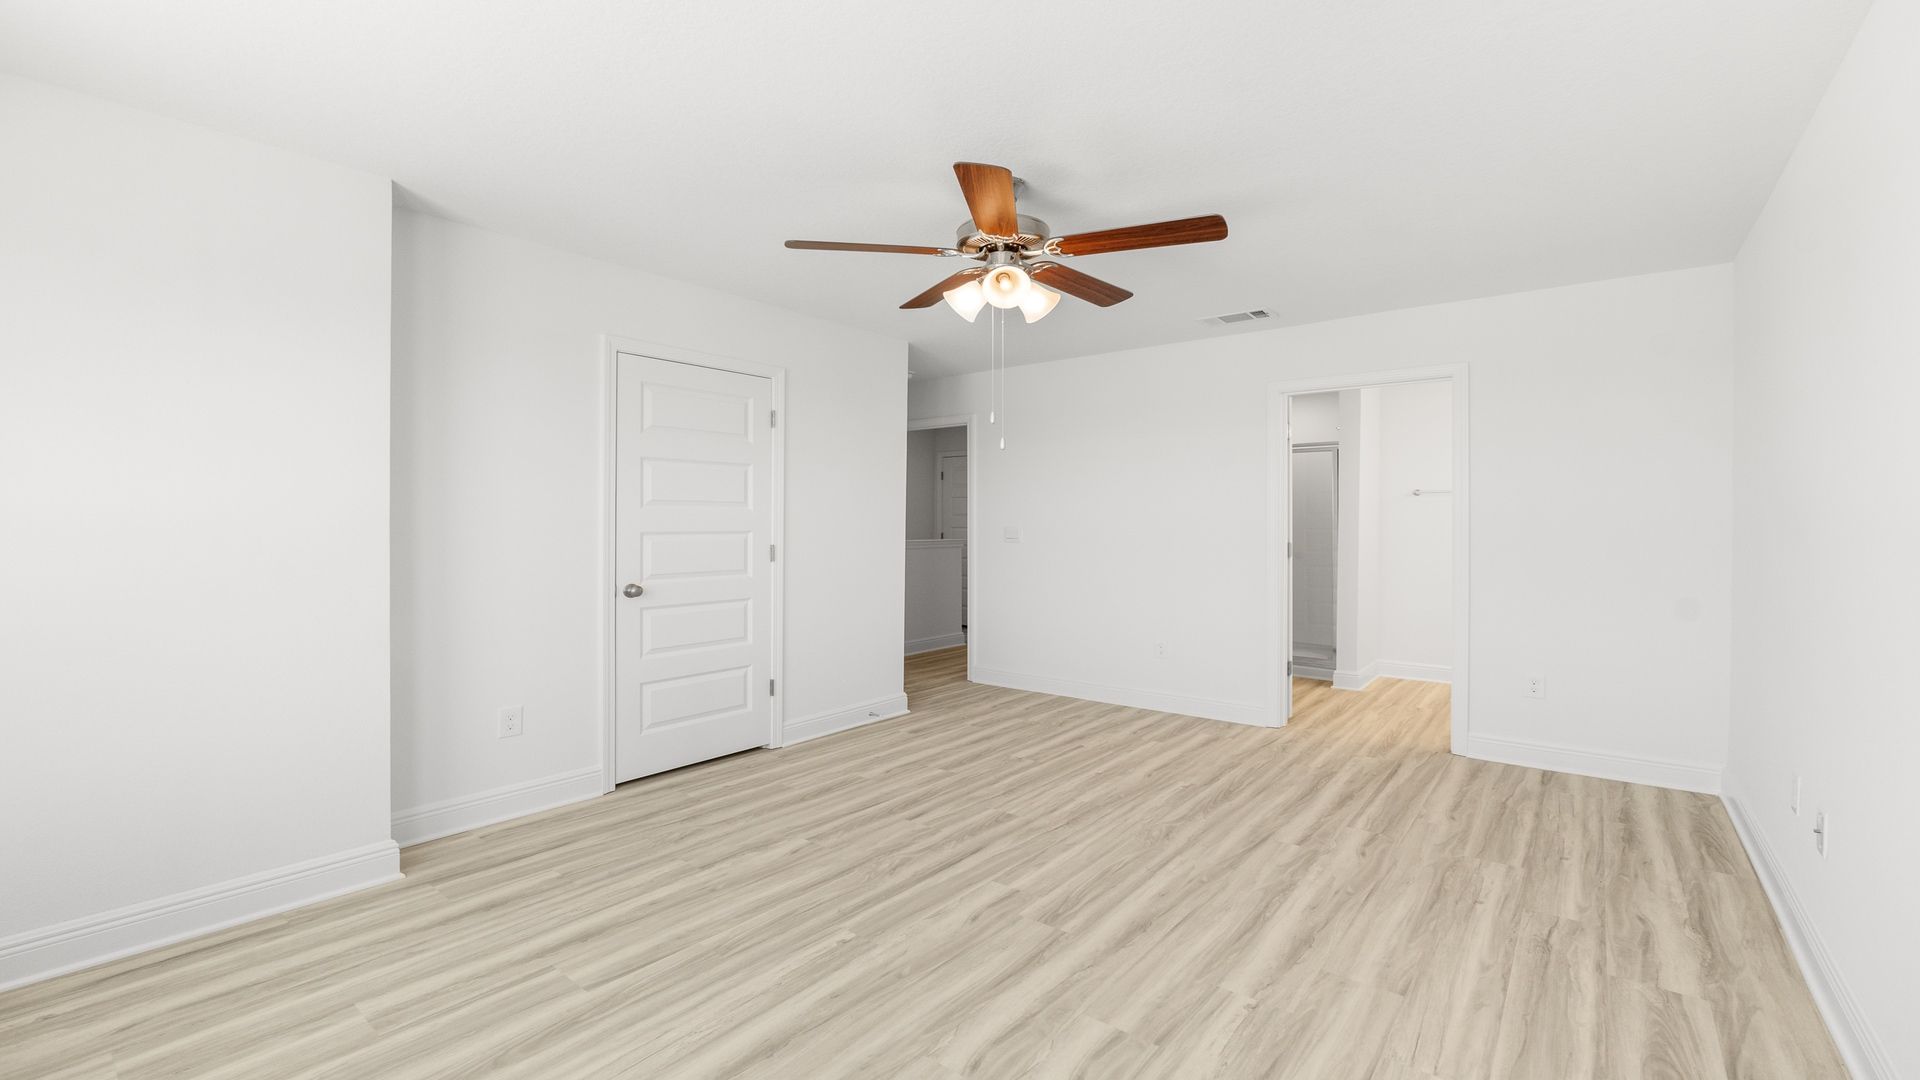 Bedroom with EVP flooring and ceiling fan and bathroom entrance.